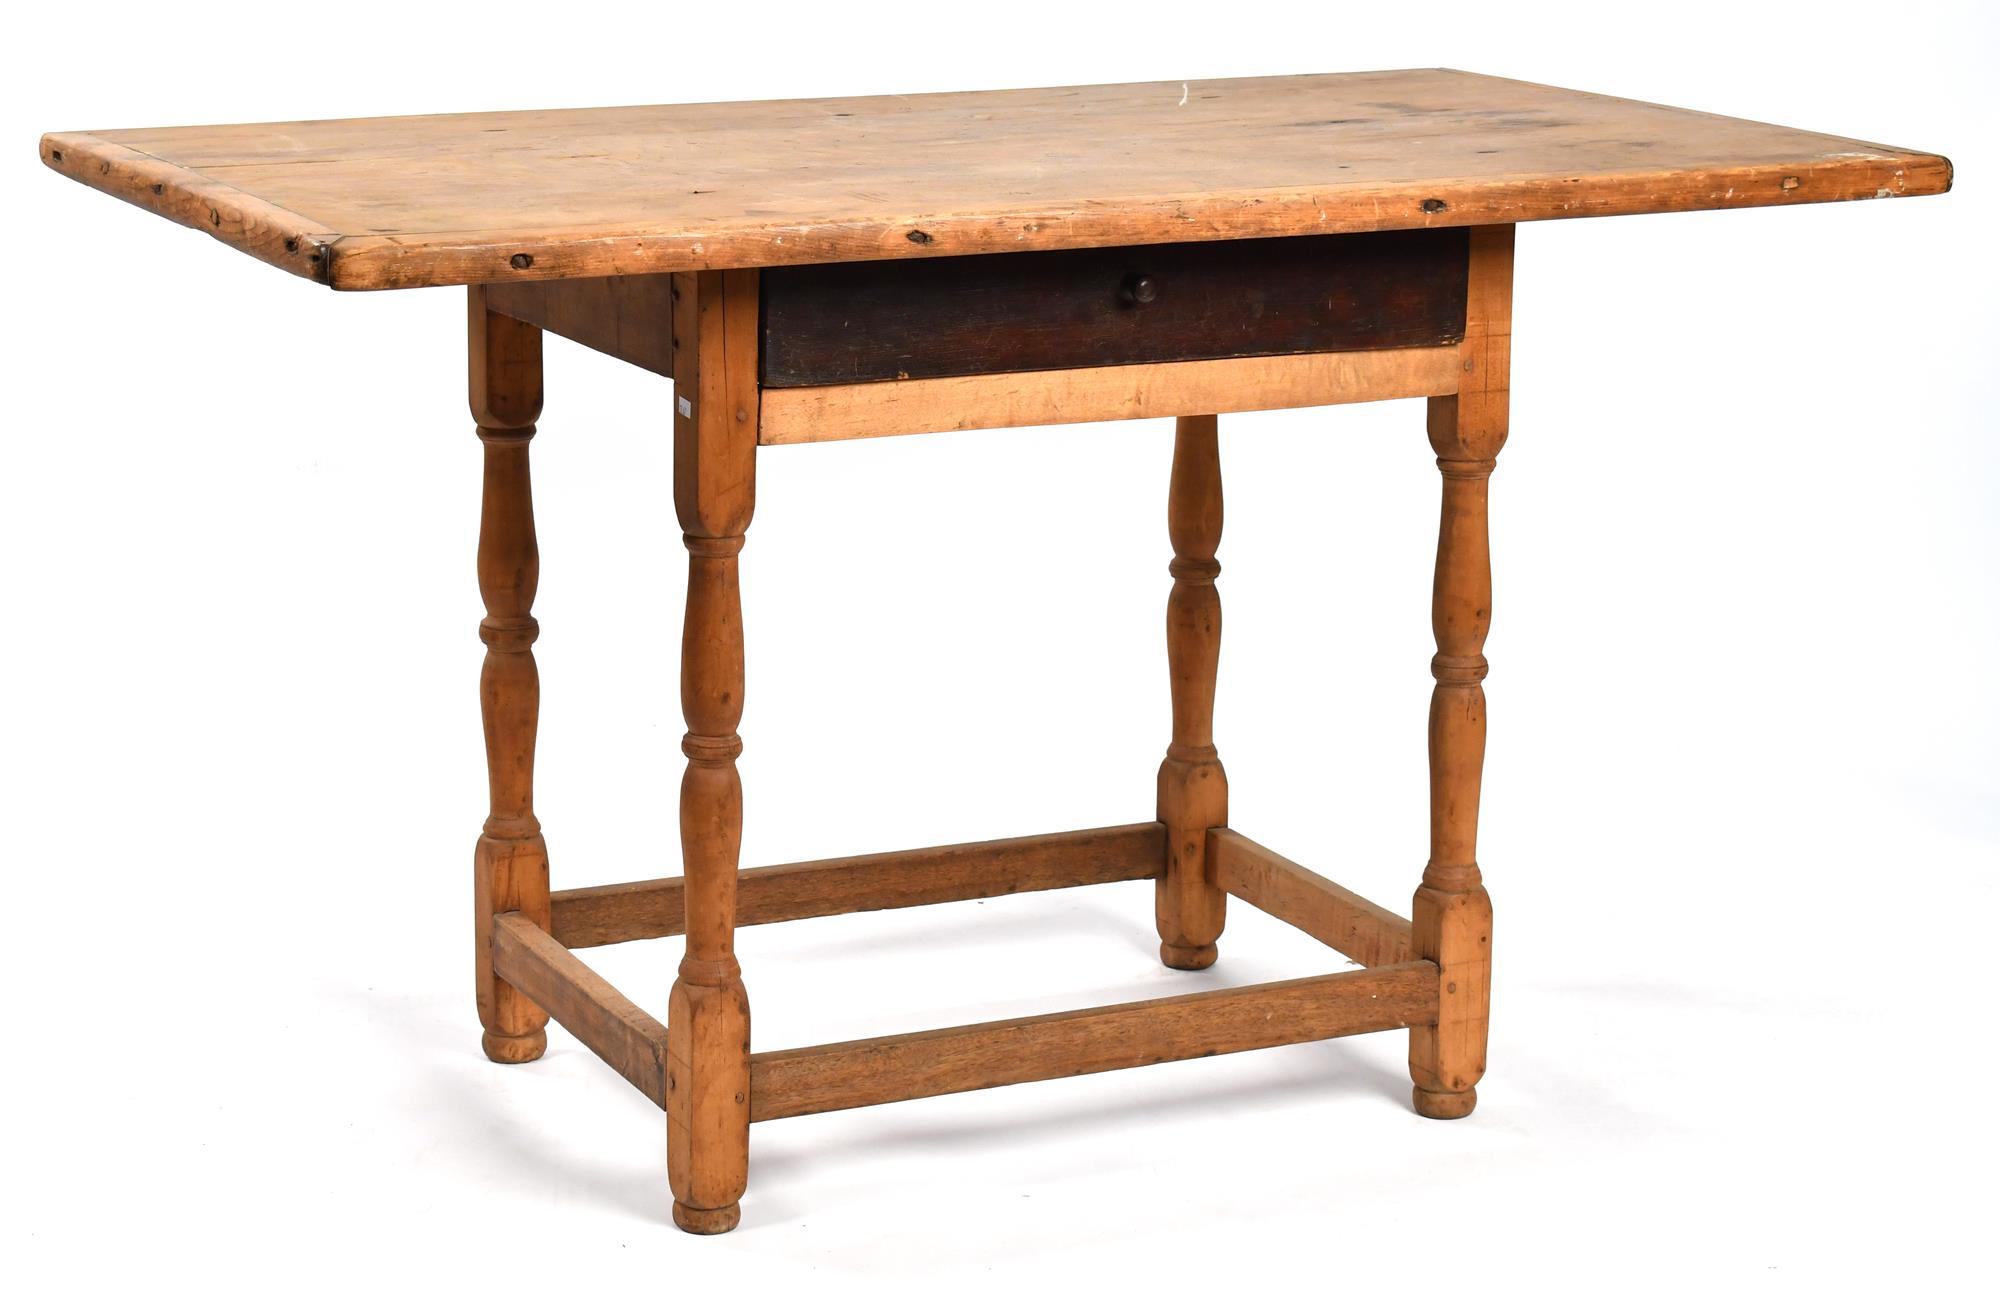 EARLY STRETCHER BASE TAVERN TABLE.